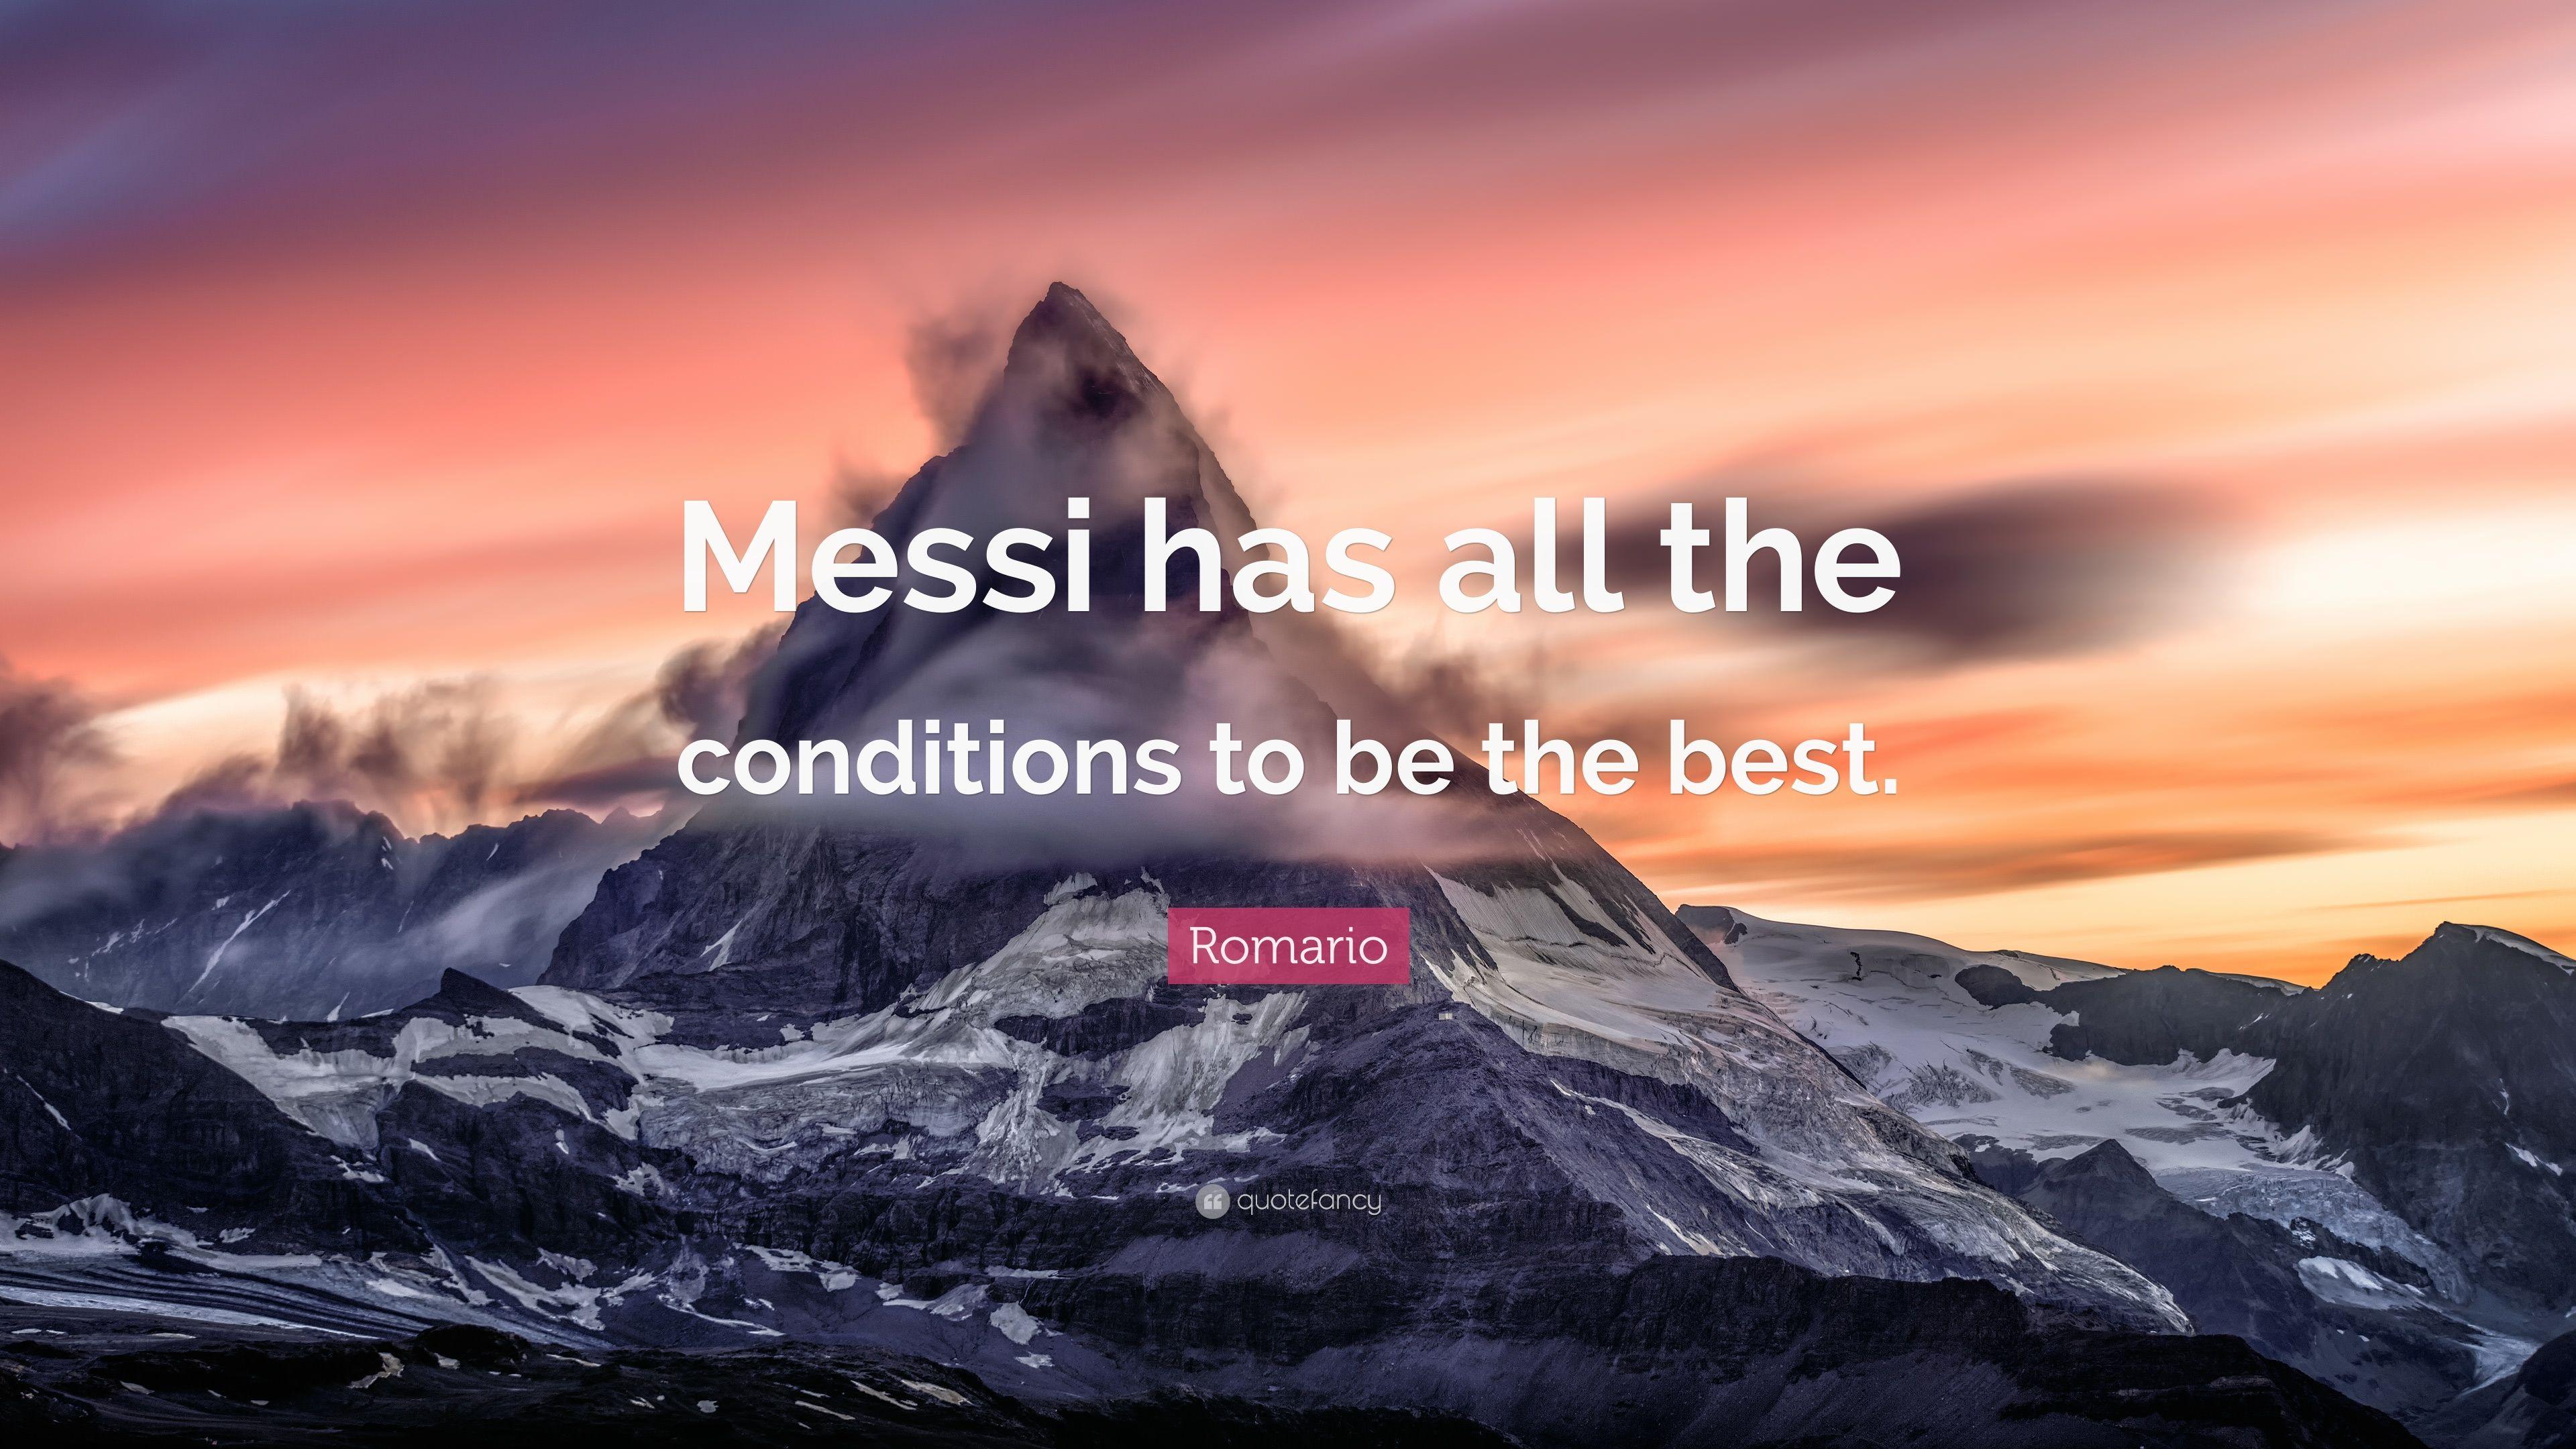 Romario Quote: “Messi has all the conditions to be the best.” 7